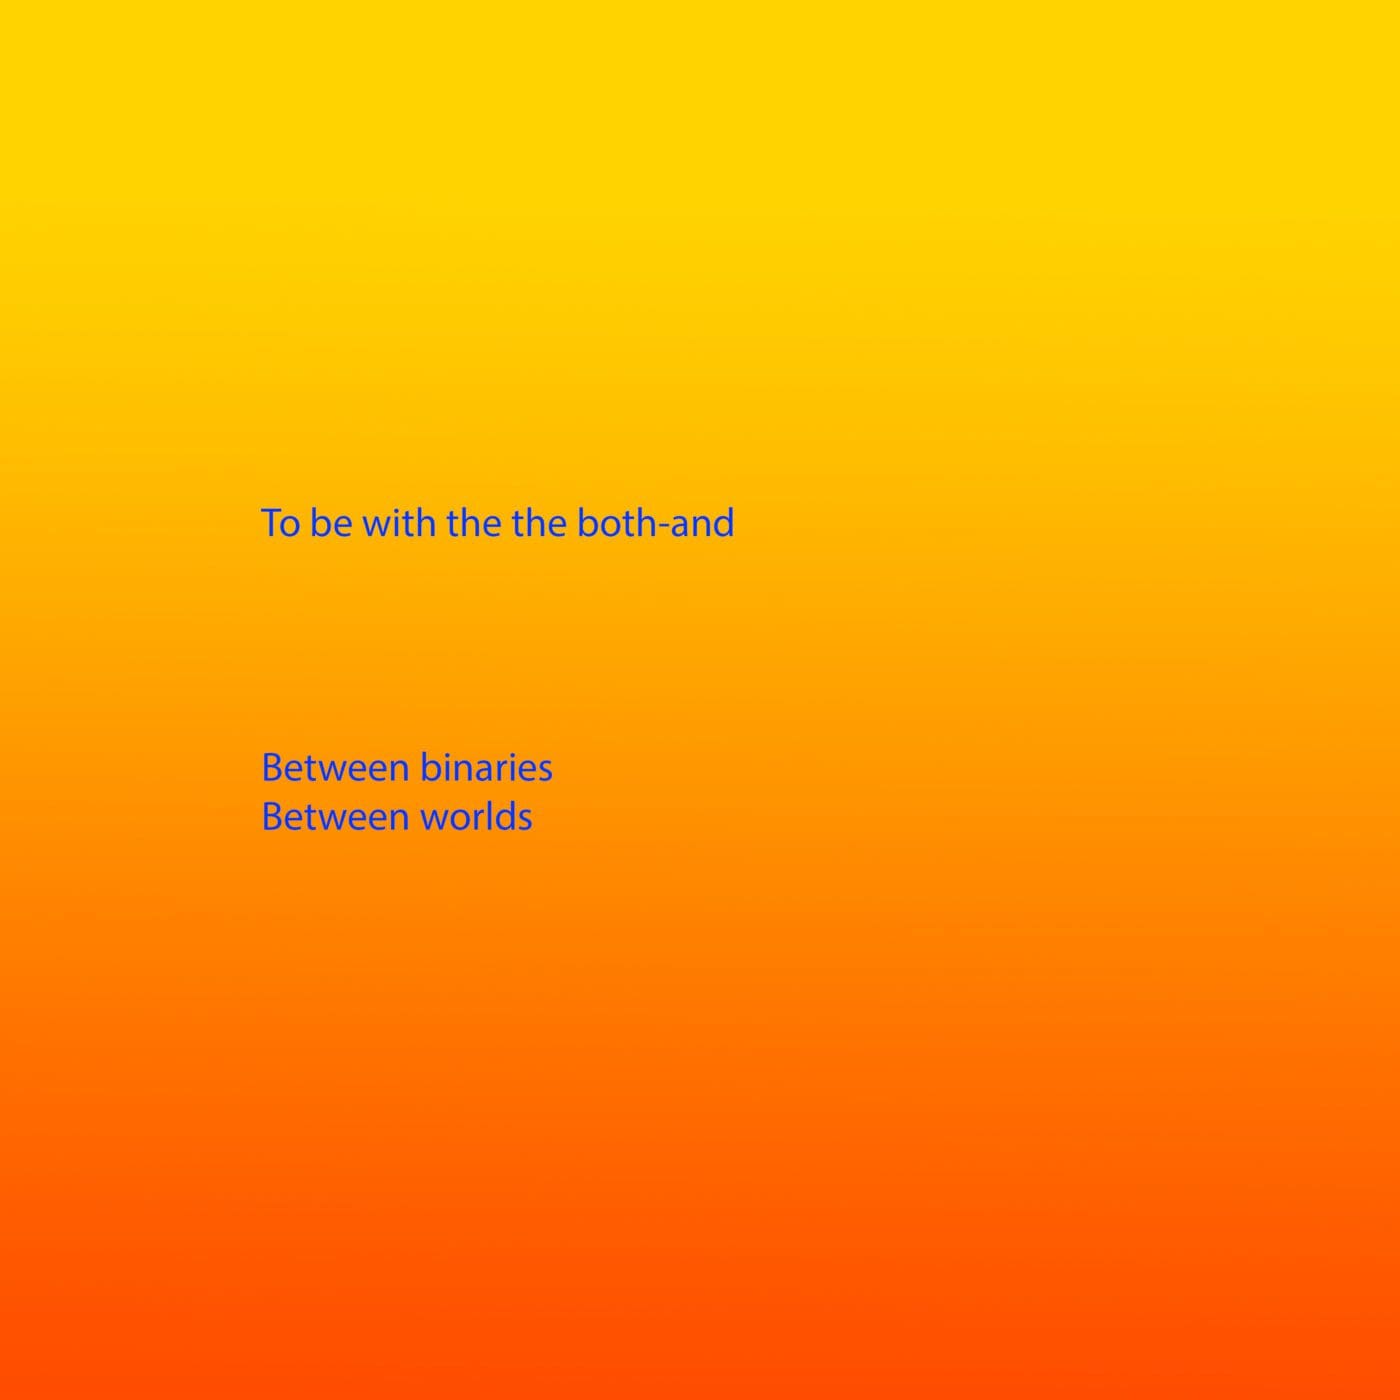 Bright blue text appears on a background that is a gradient from yellow, through orange to red. The text reads: To be with the the both-and Between binaries Between worlds